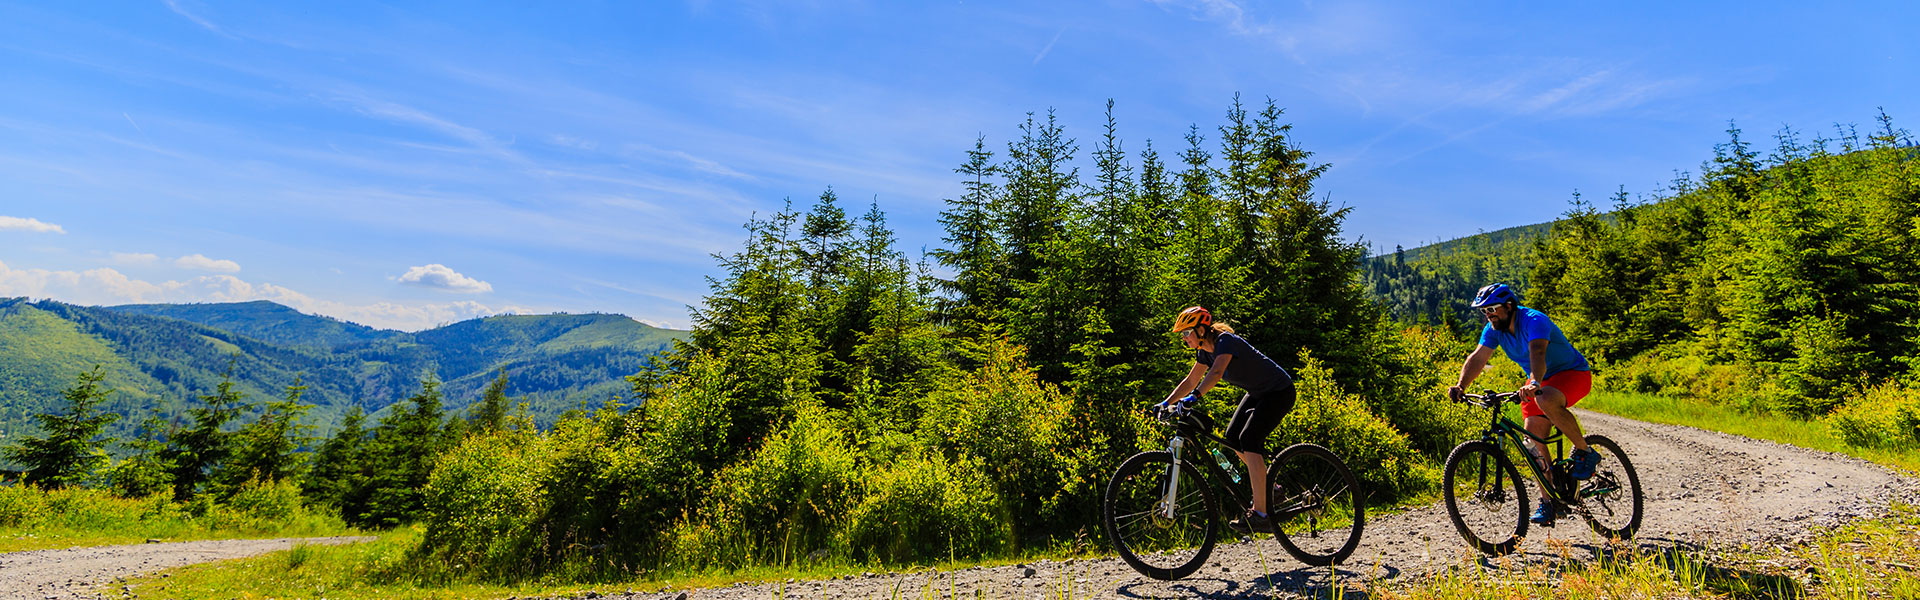 Two people mountain biking on a trail in the mountains